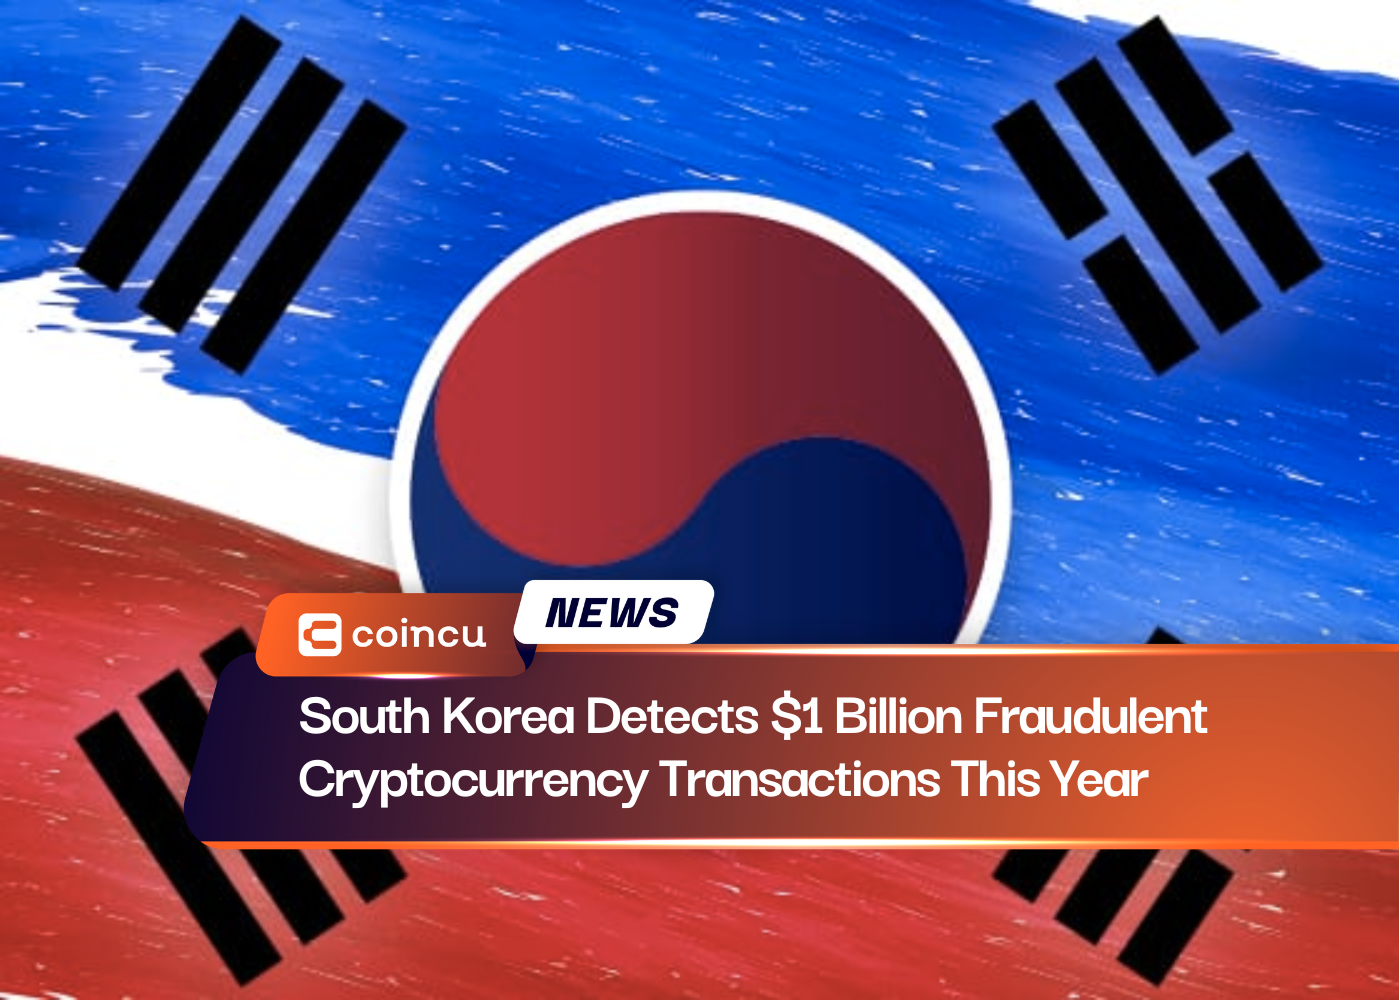 South Korea Detects $1 Billion Fraudulent Cryptocurrency Transactions This Year